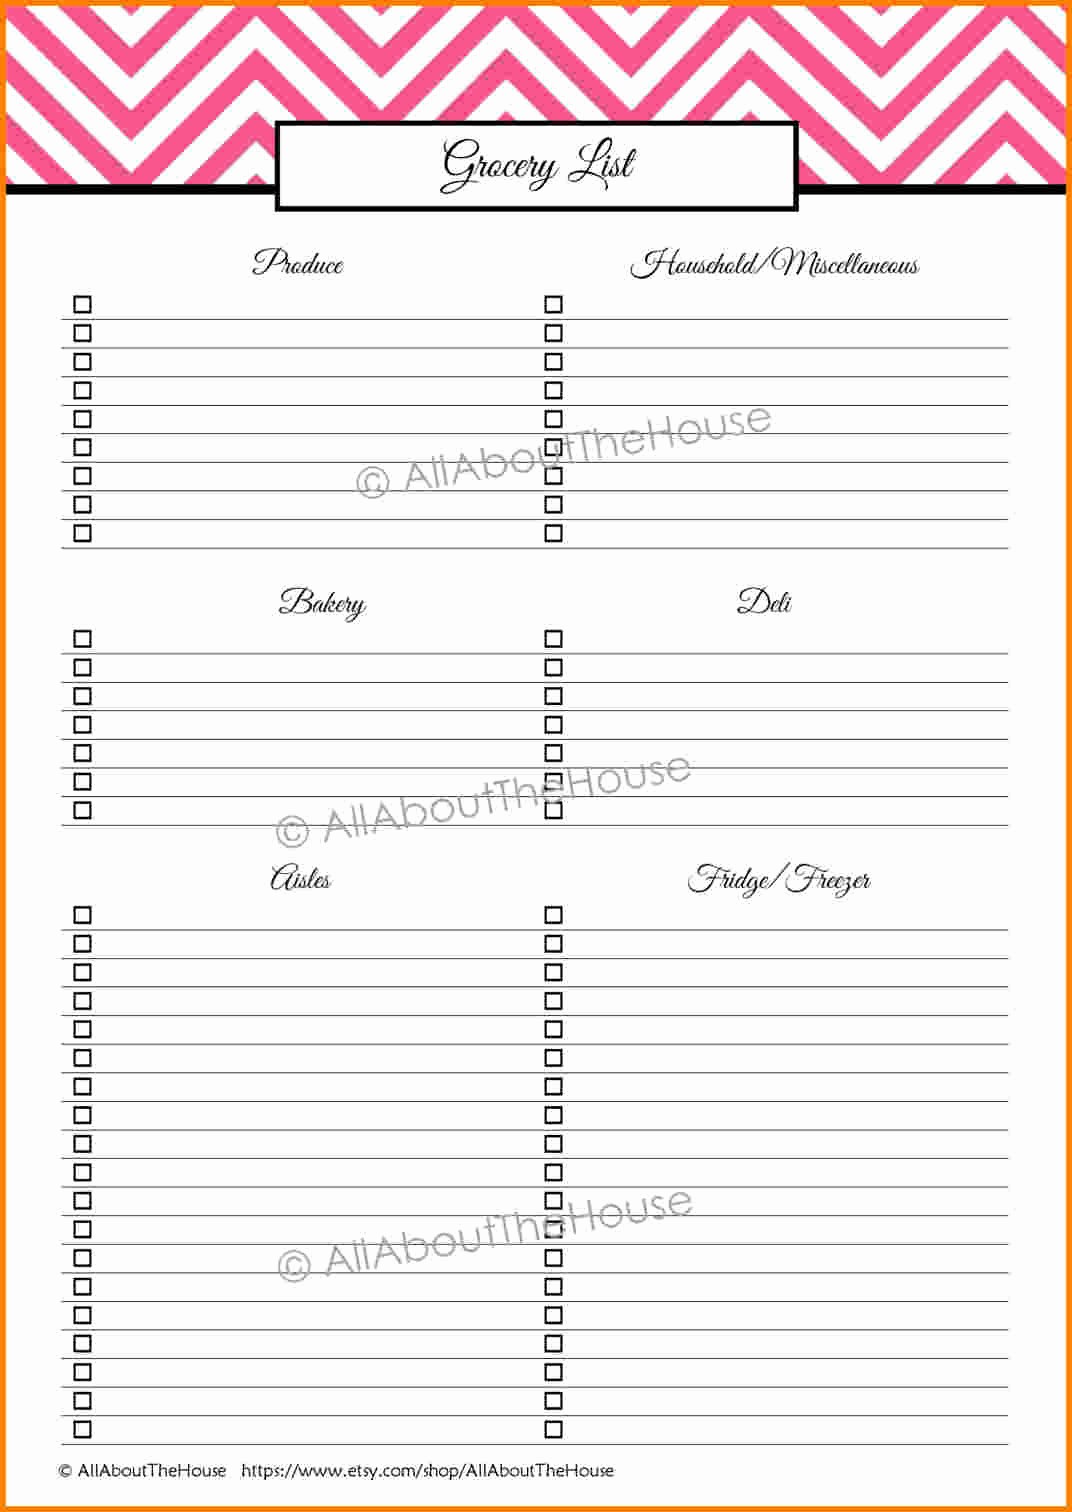 Sign Up Sheets for events Fresh Doc Word Template Sign Up Sheet – Sign Up Sheets